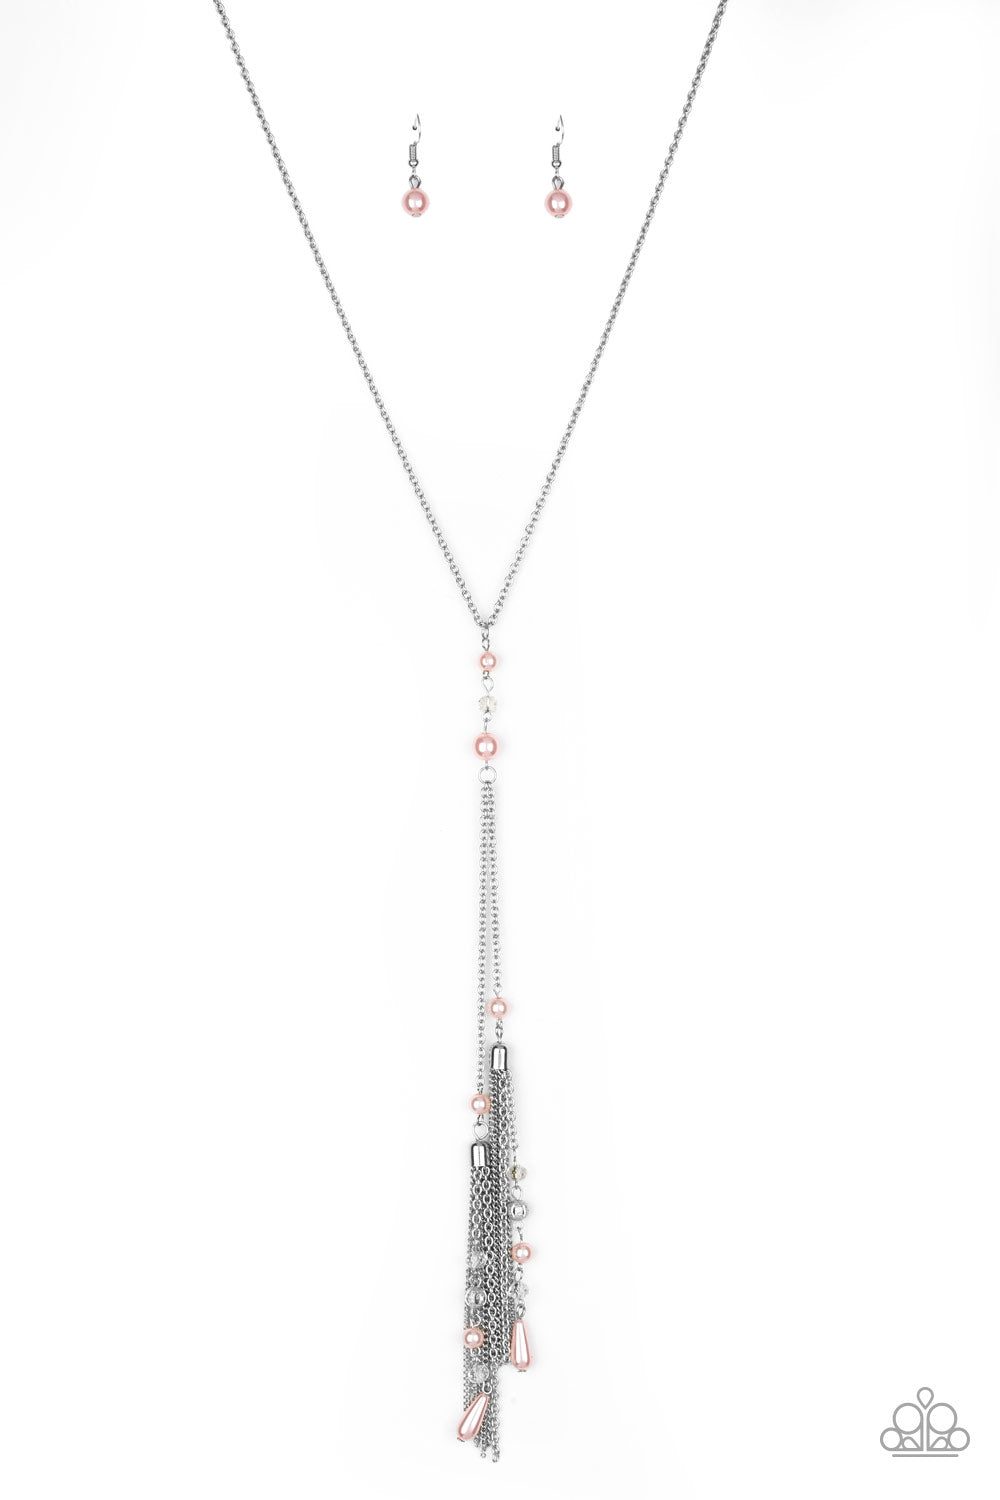 Timeless Tassels Necklace (Brown, Pink)